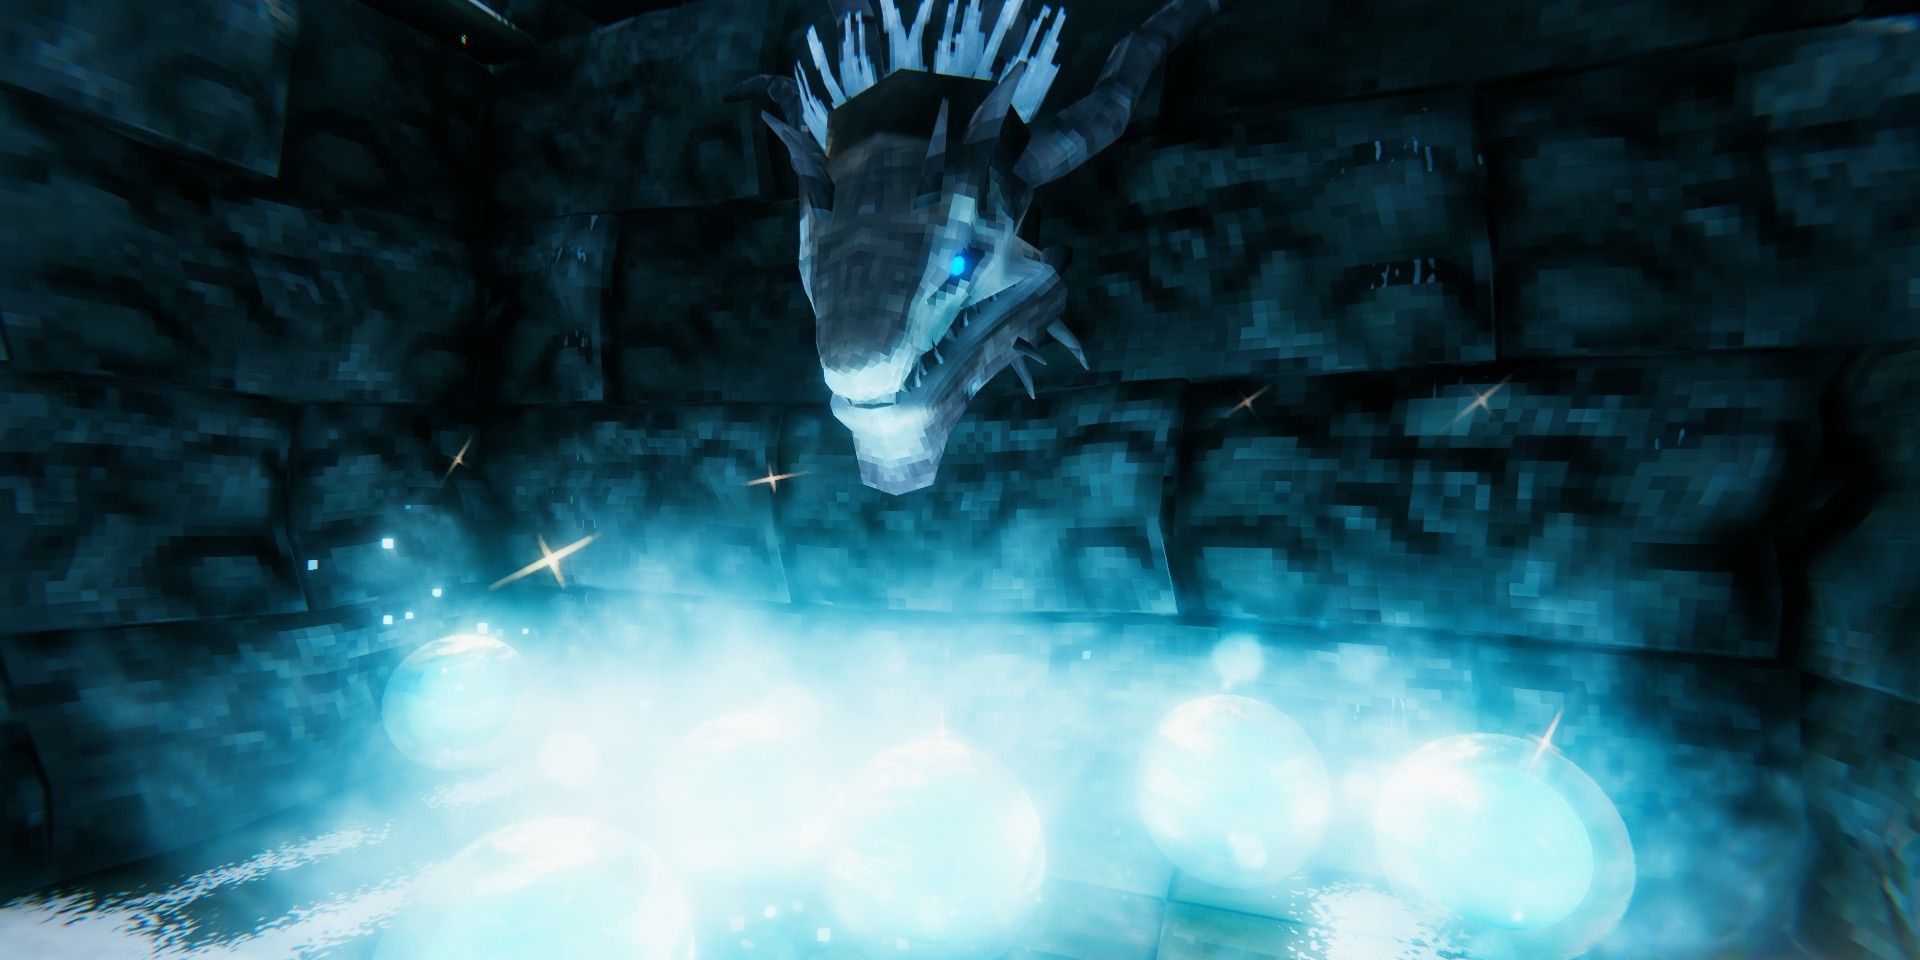 The Moder Trophy hangs above a pile of glowing Dragon Tears by a stone wall.